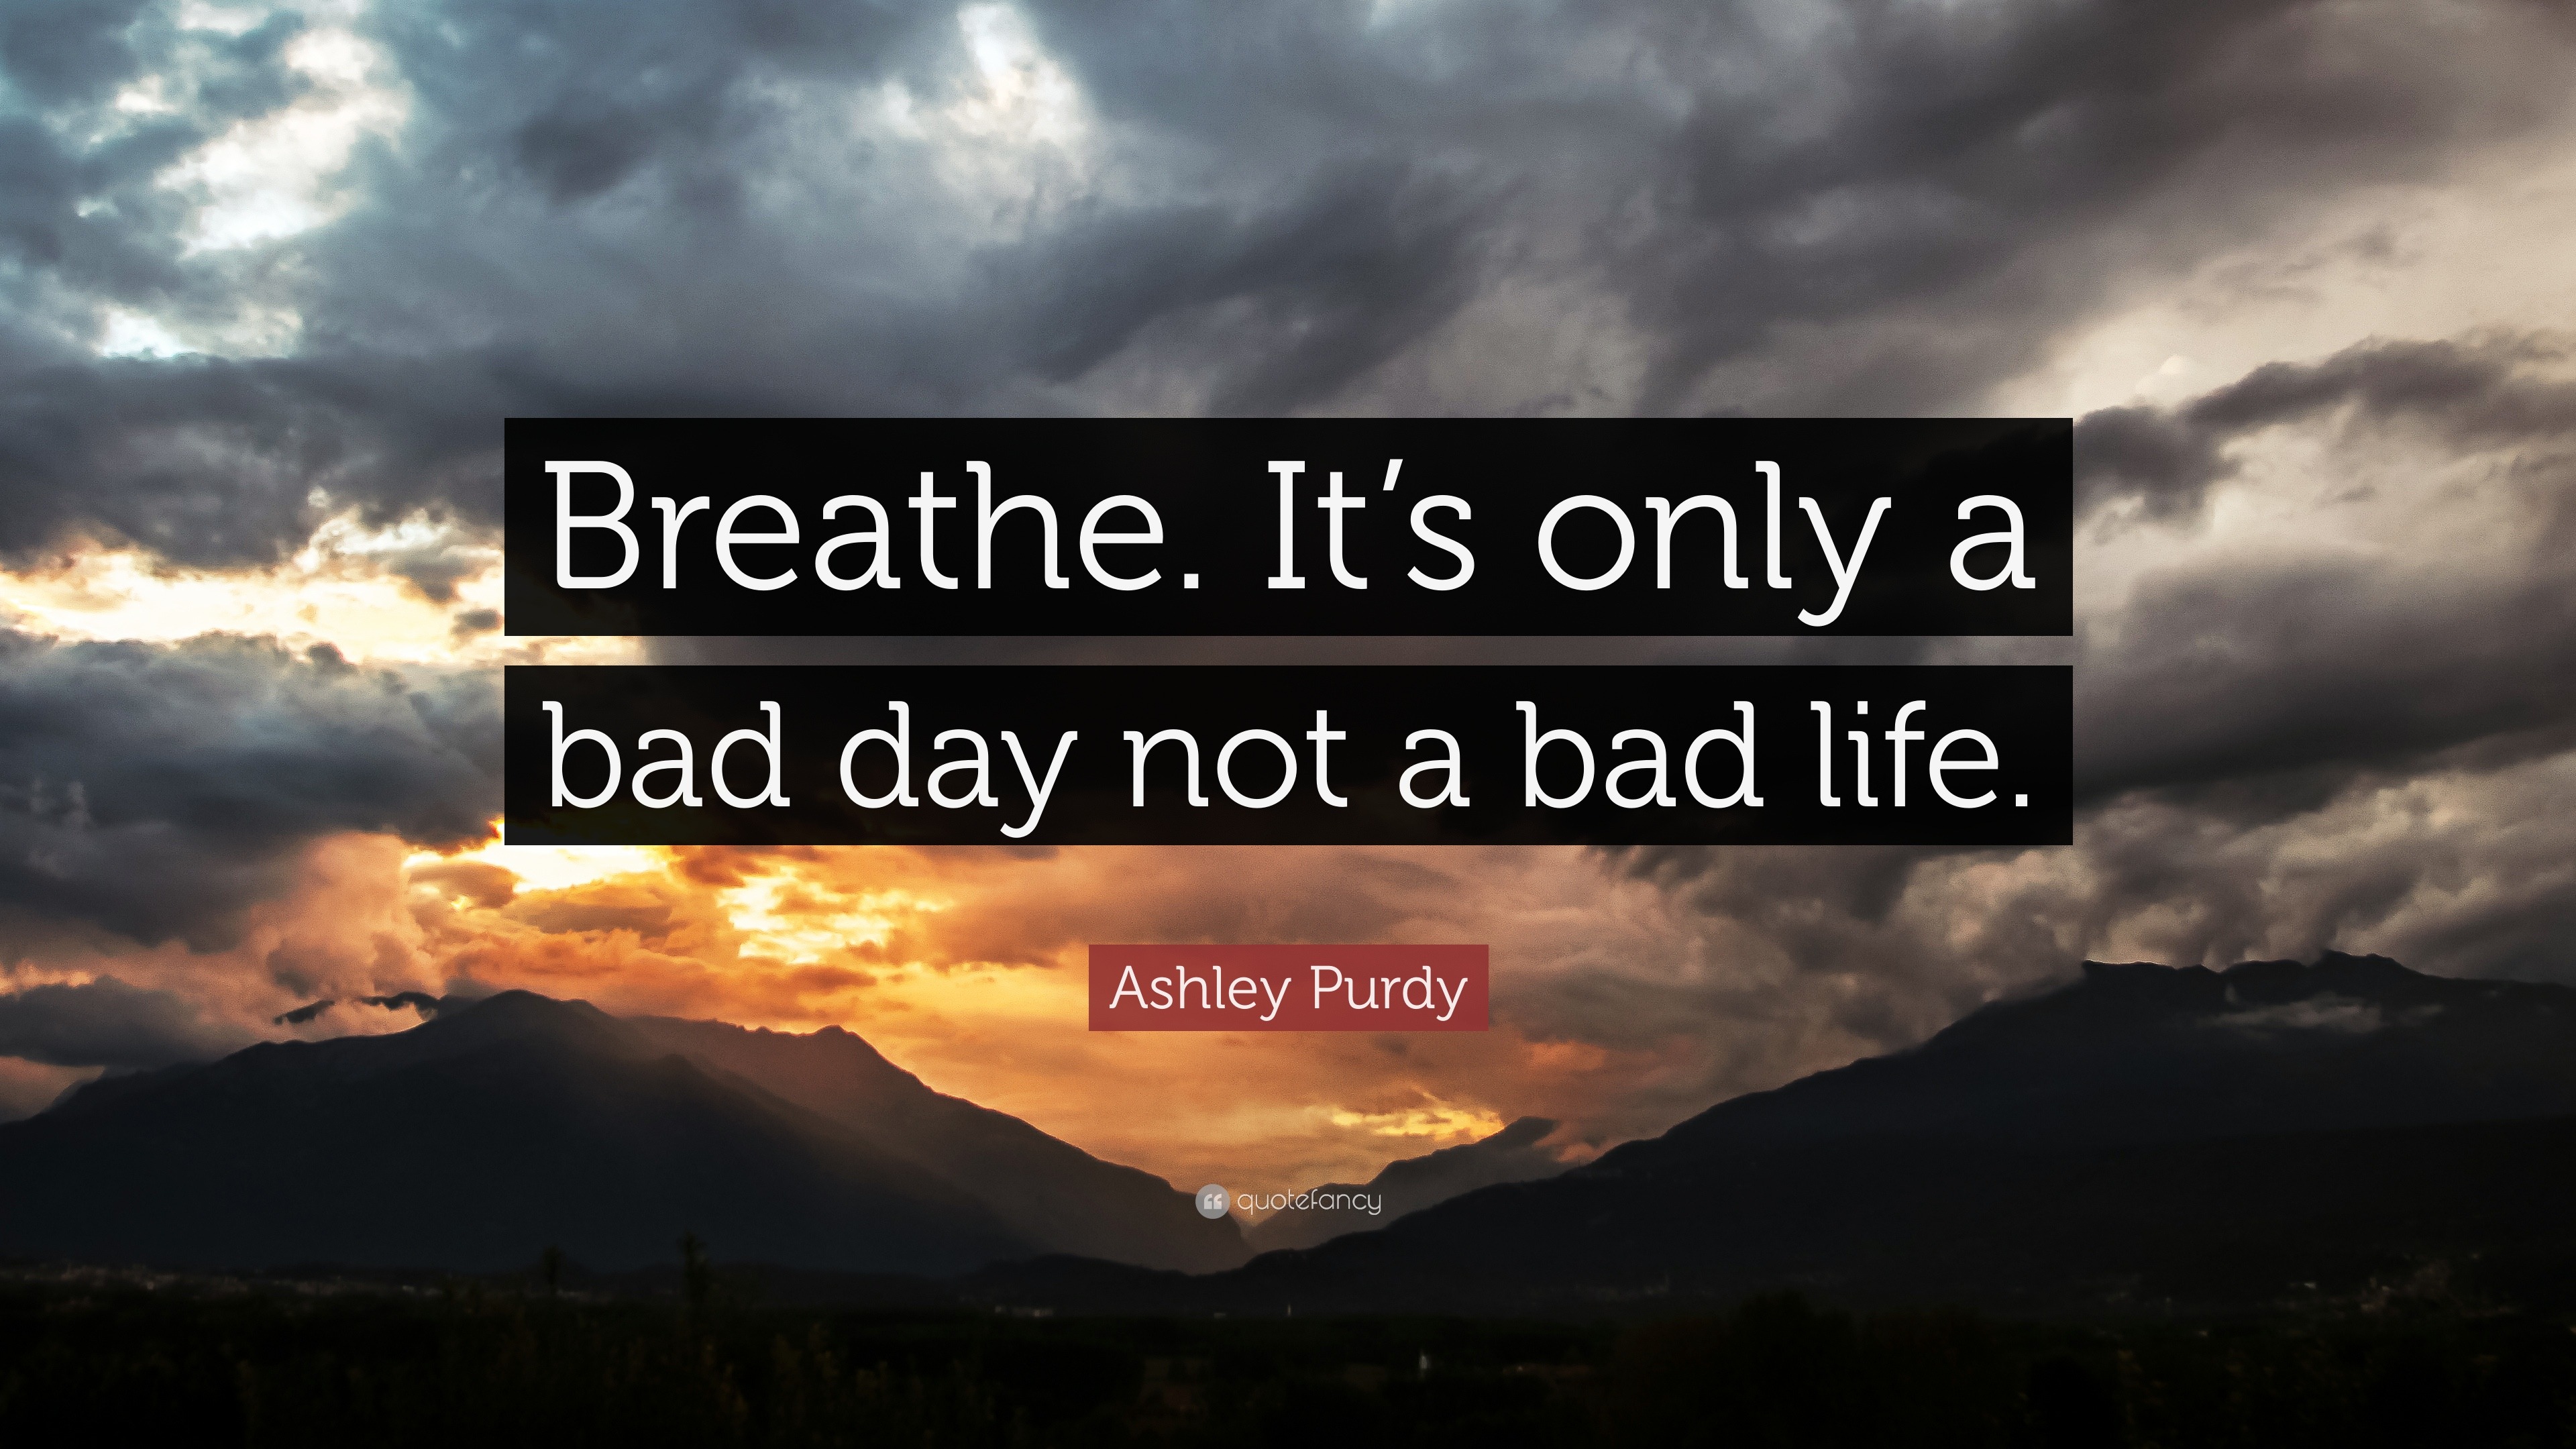 Ashley Purdy Quote “Breathe It s only a bad day not a bad life